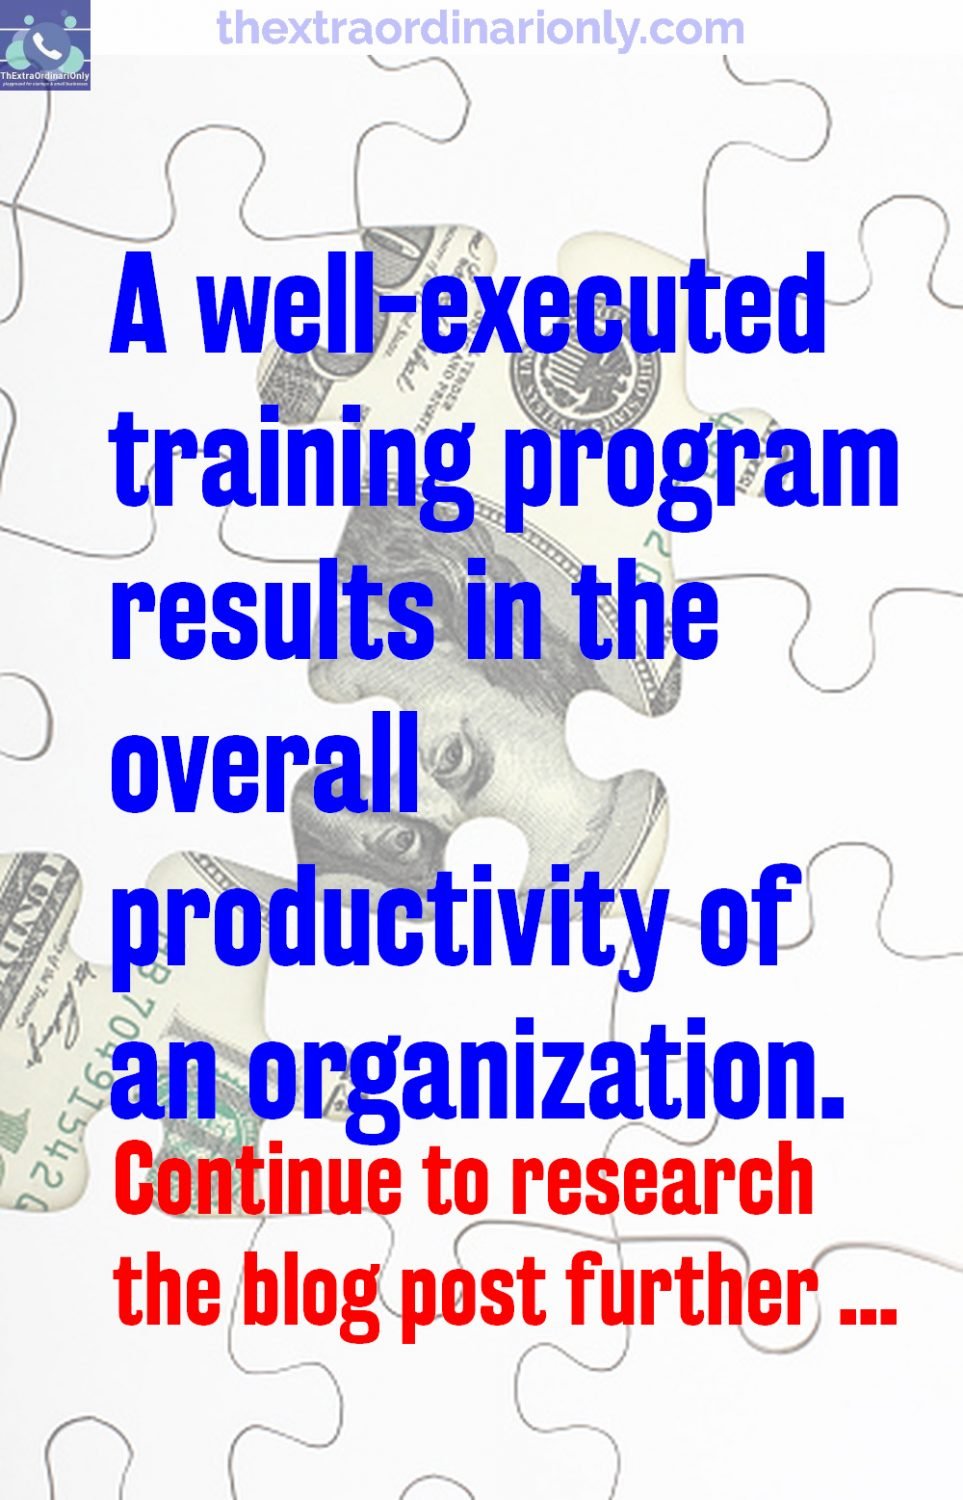 ThExtraordinariOnly well executed training program contributes to overall productivity of organization